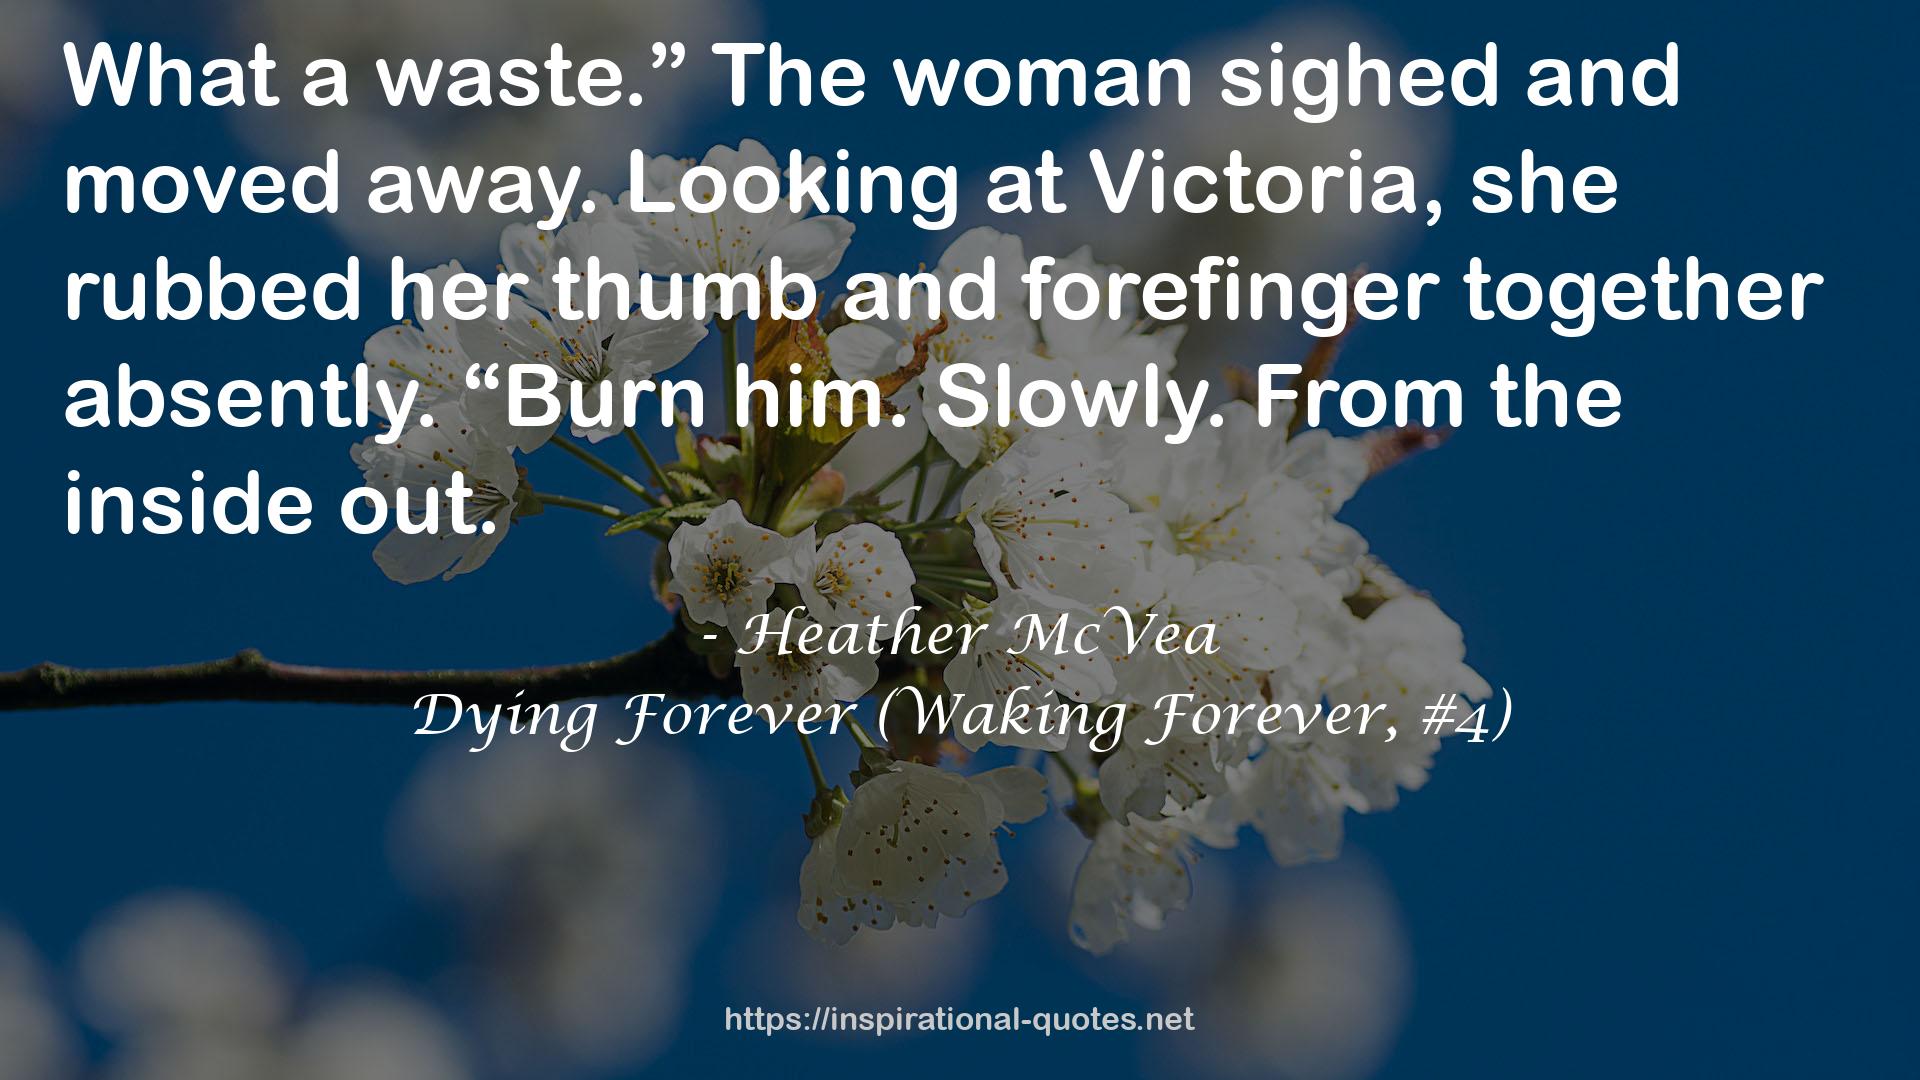 Dying Forever (Waking Forever, #4) QUOTES